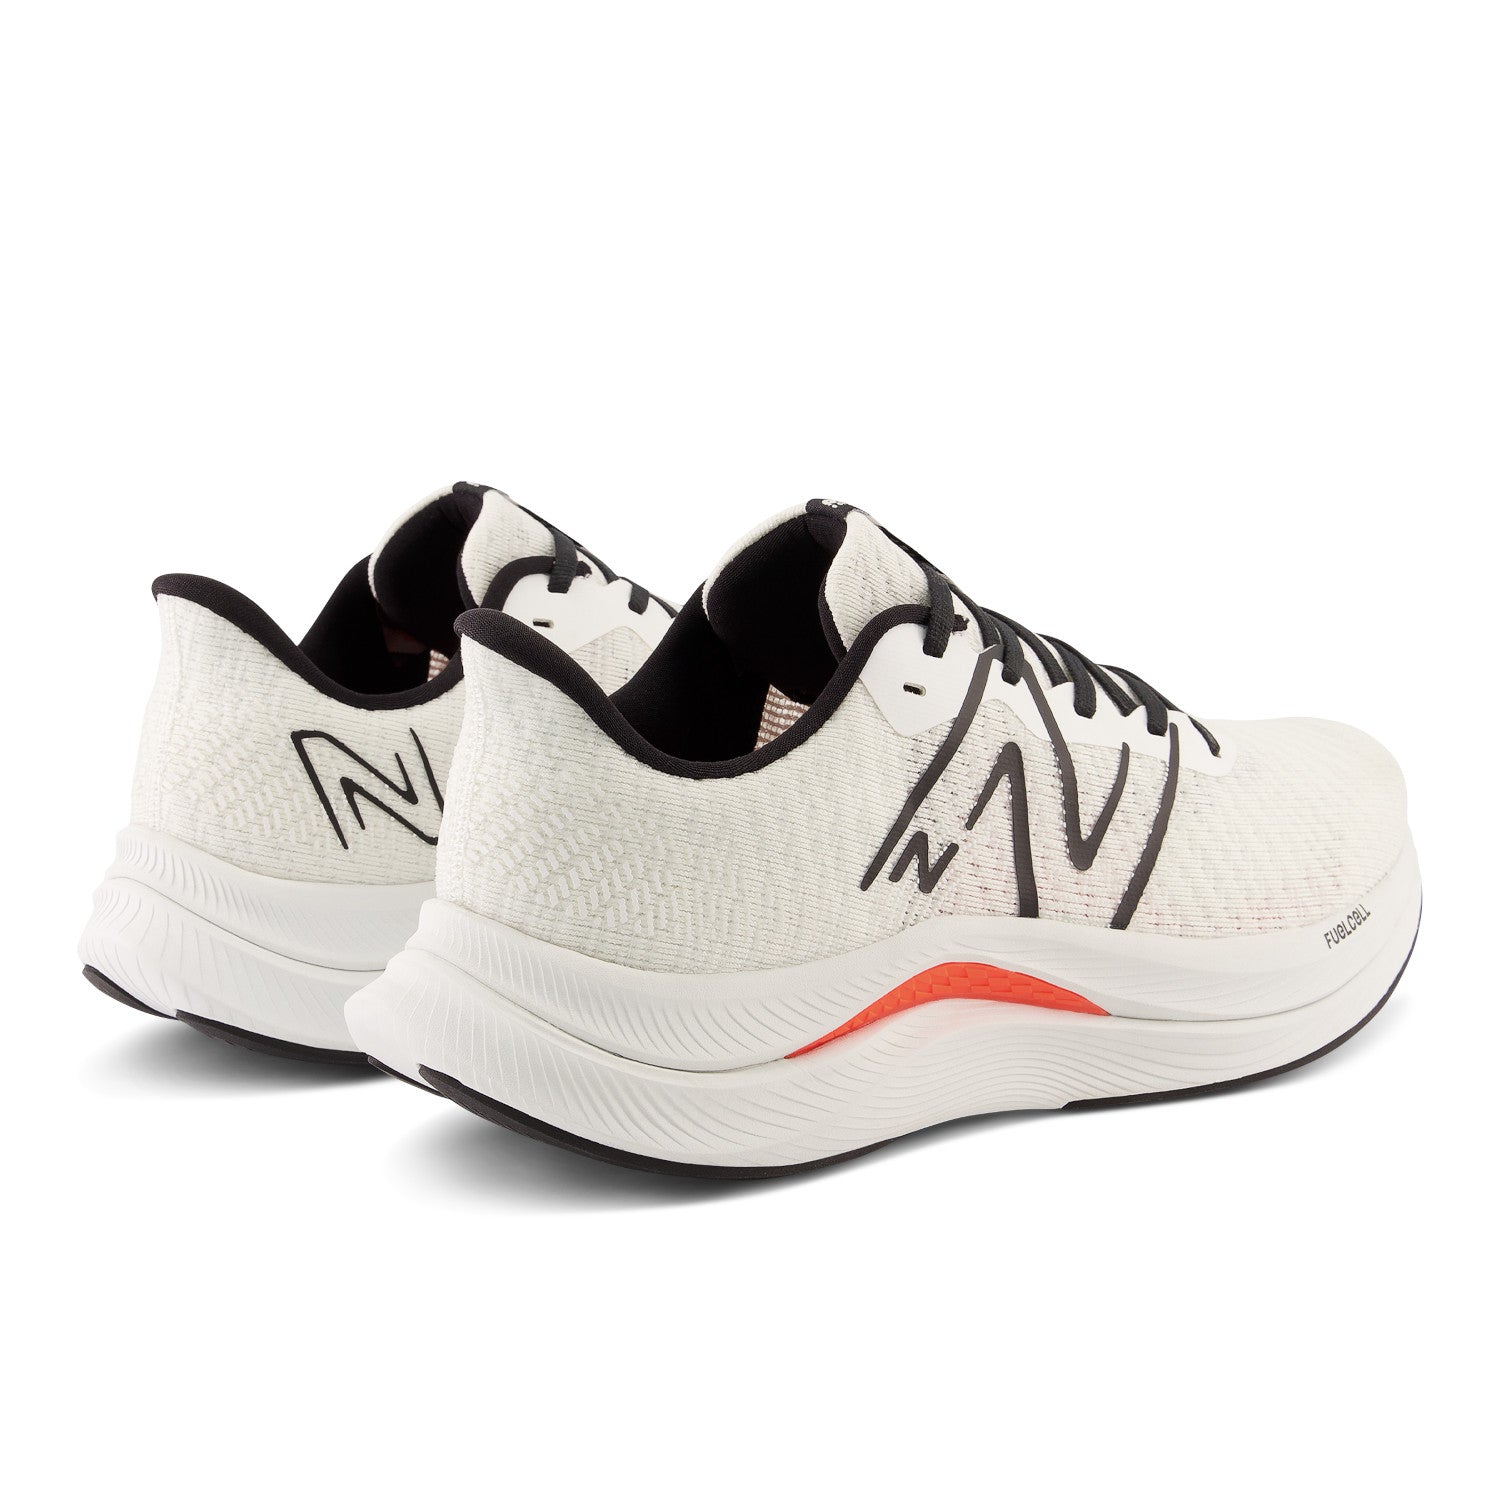 New Balance FuelCell Propel v4 MFCPRLW4 Men's6